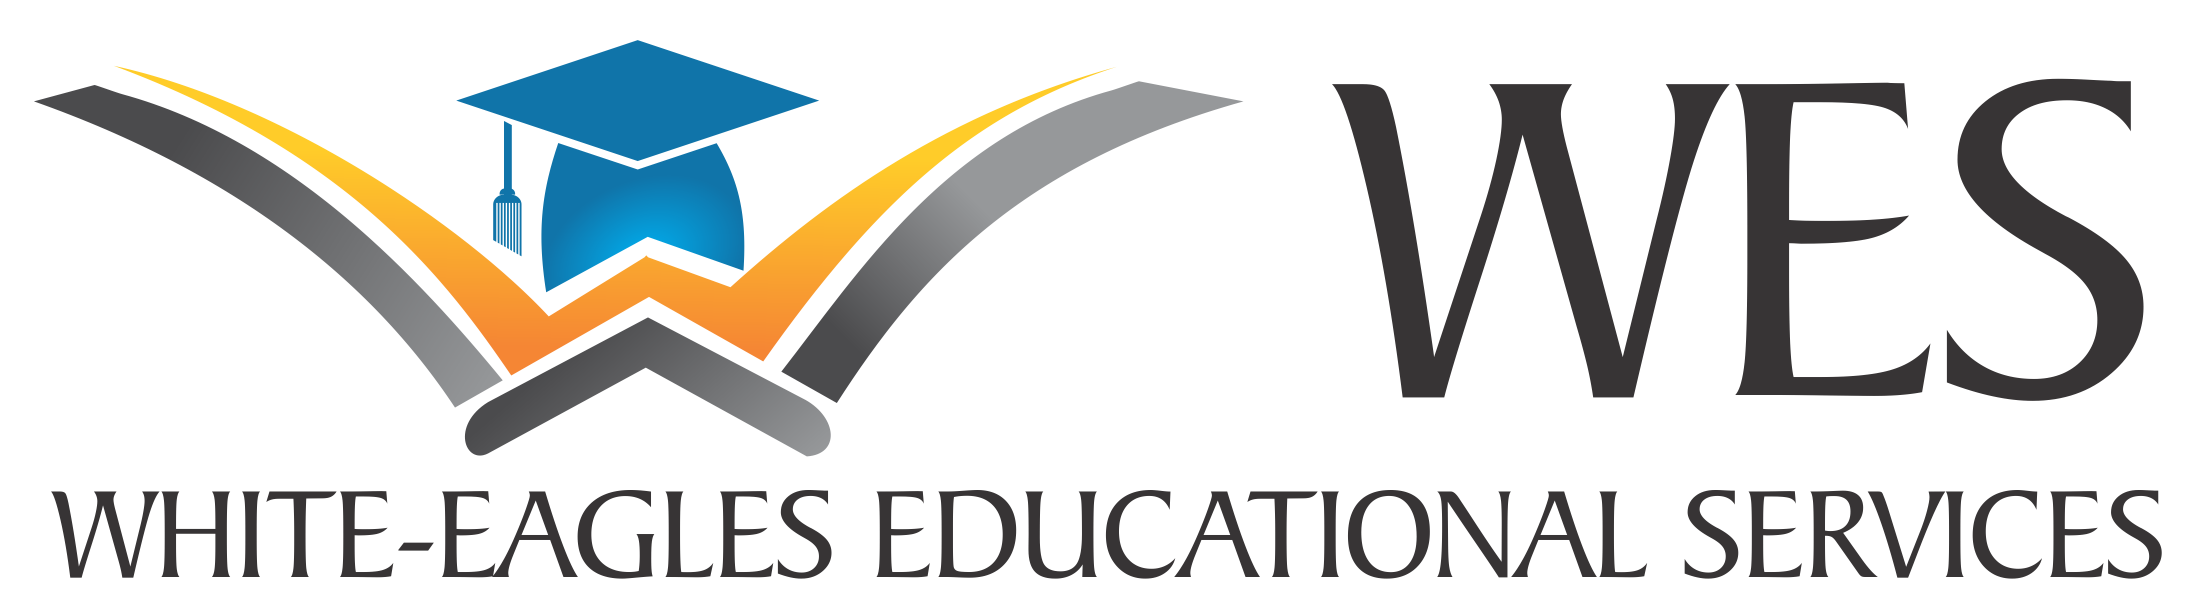 White-eagles Educational Services